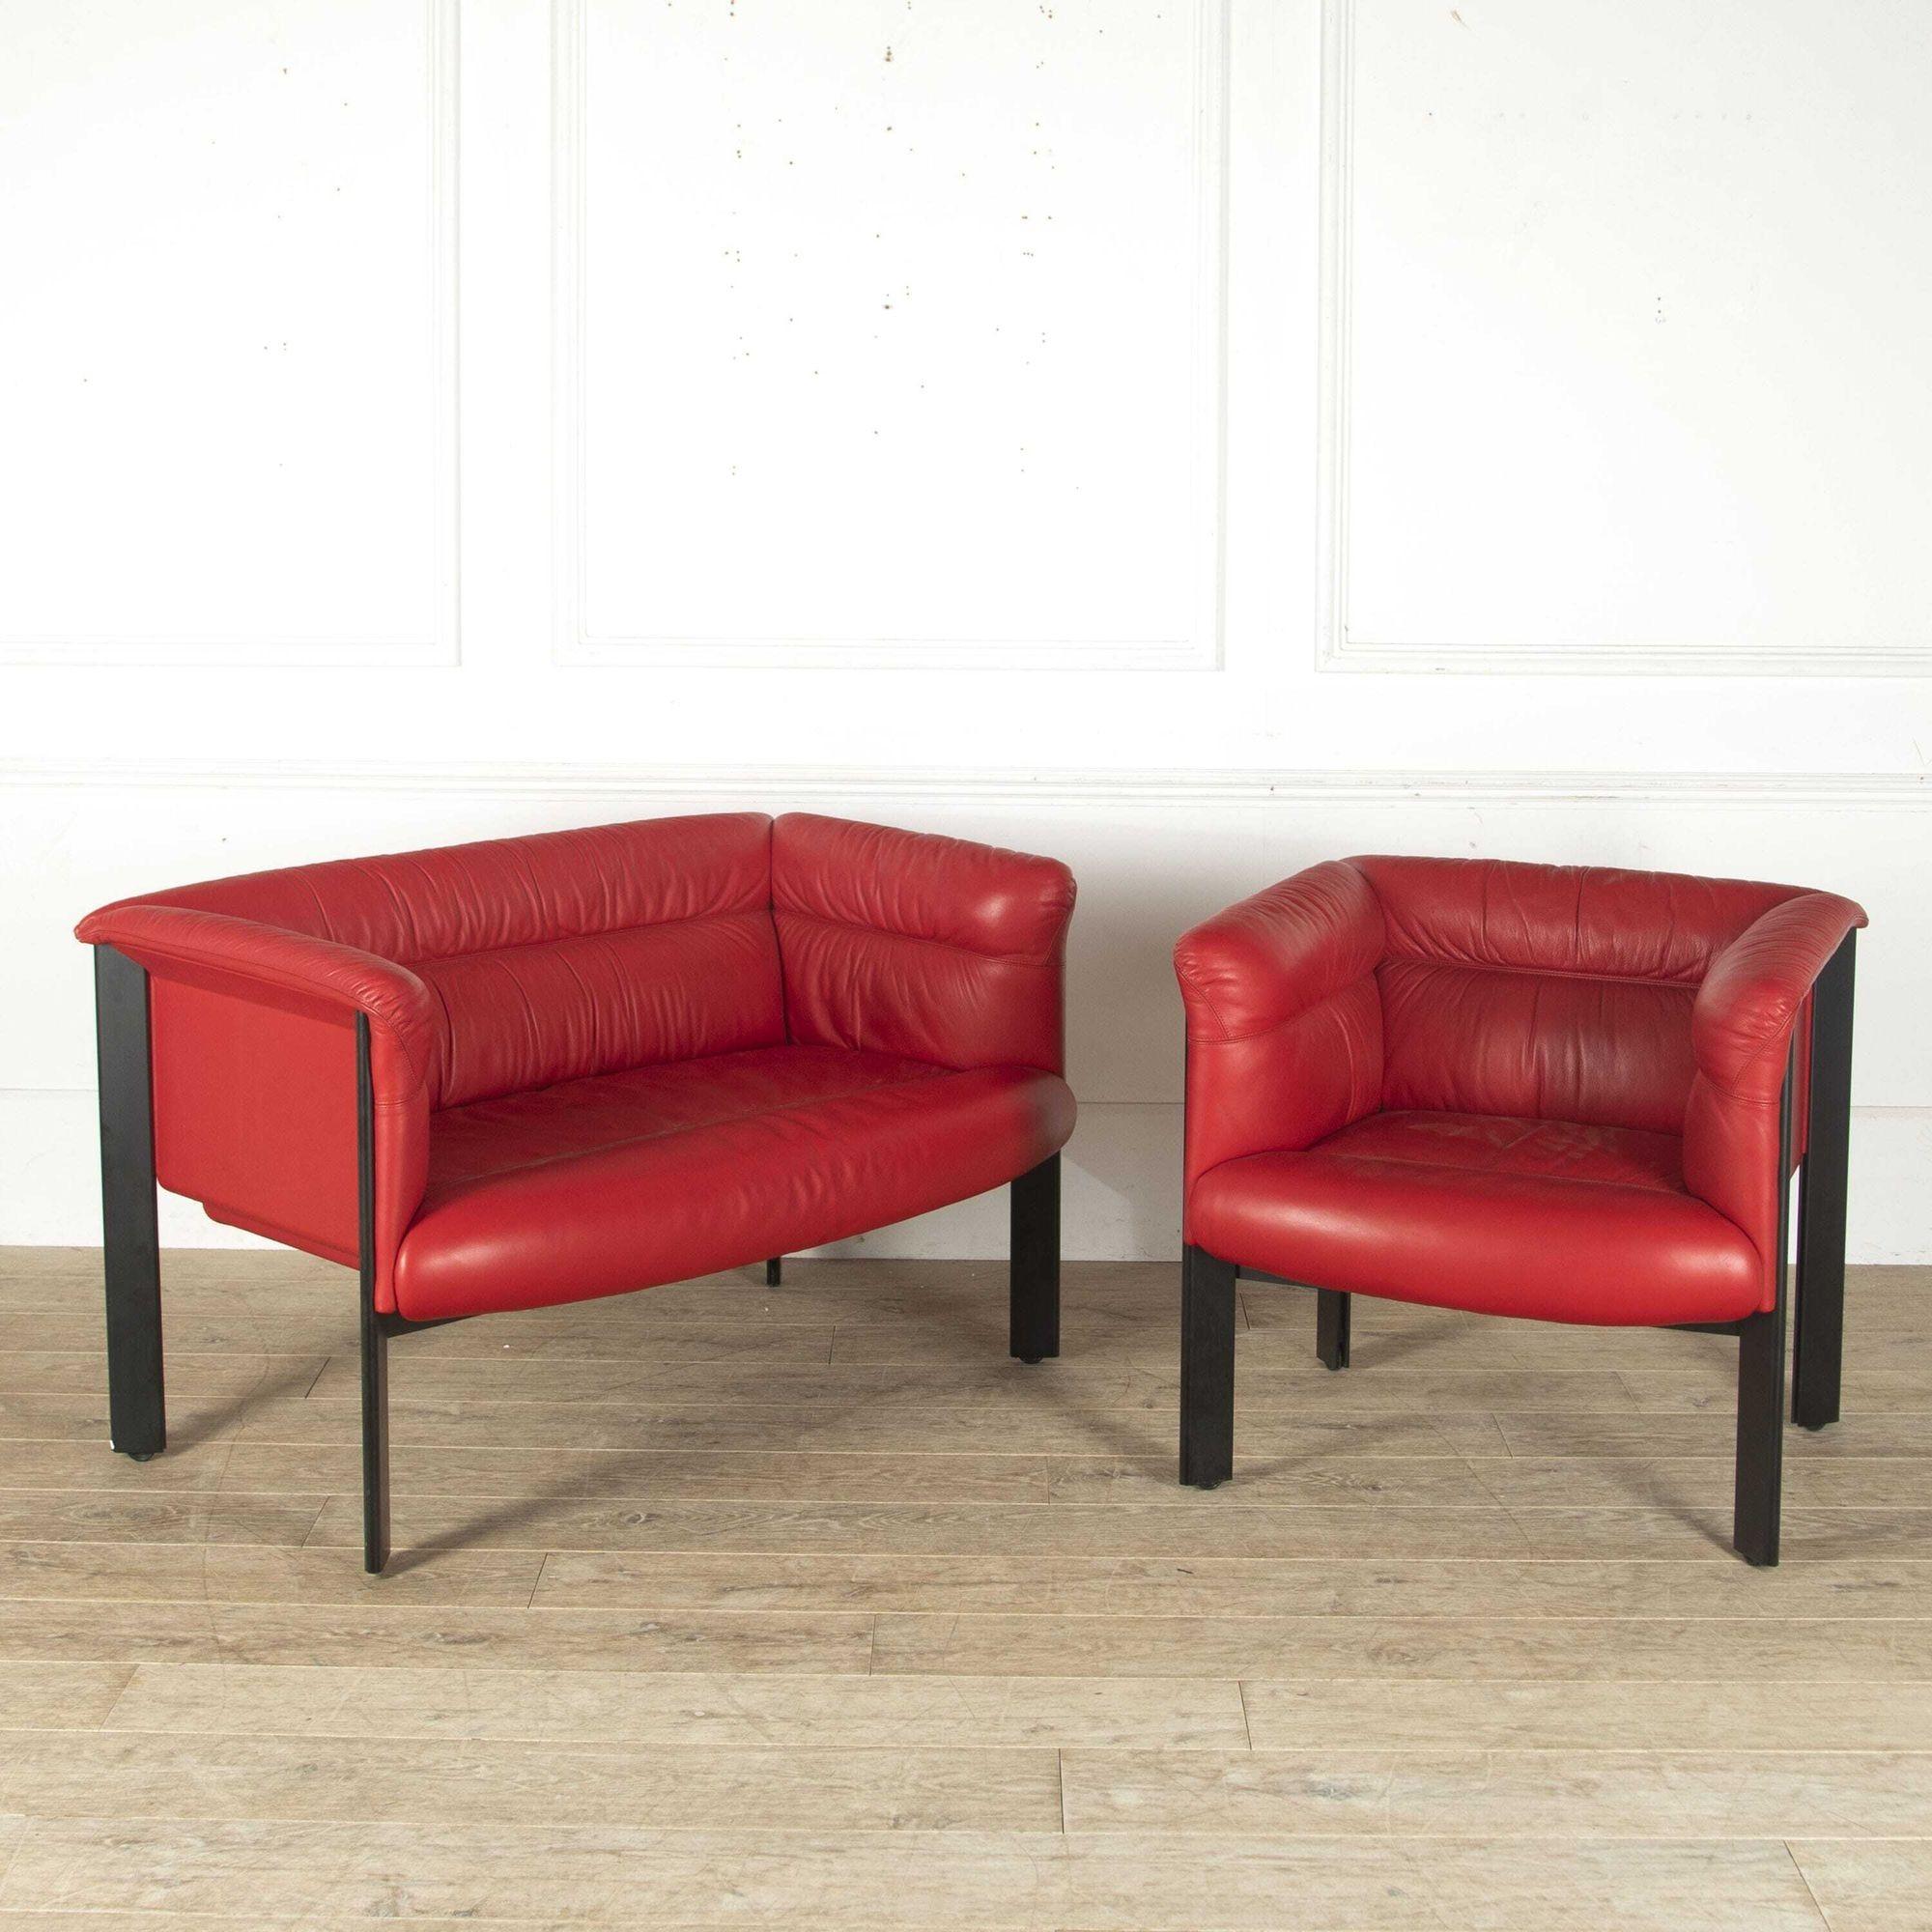 Metal Seating Set by Marco Zanuso For Sale